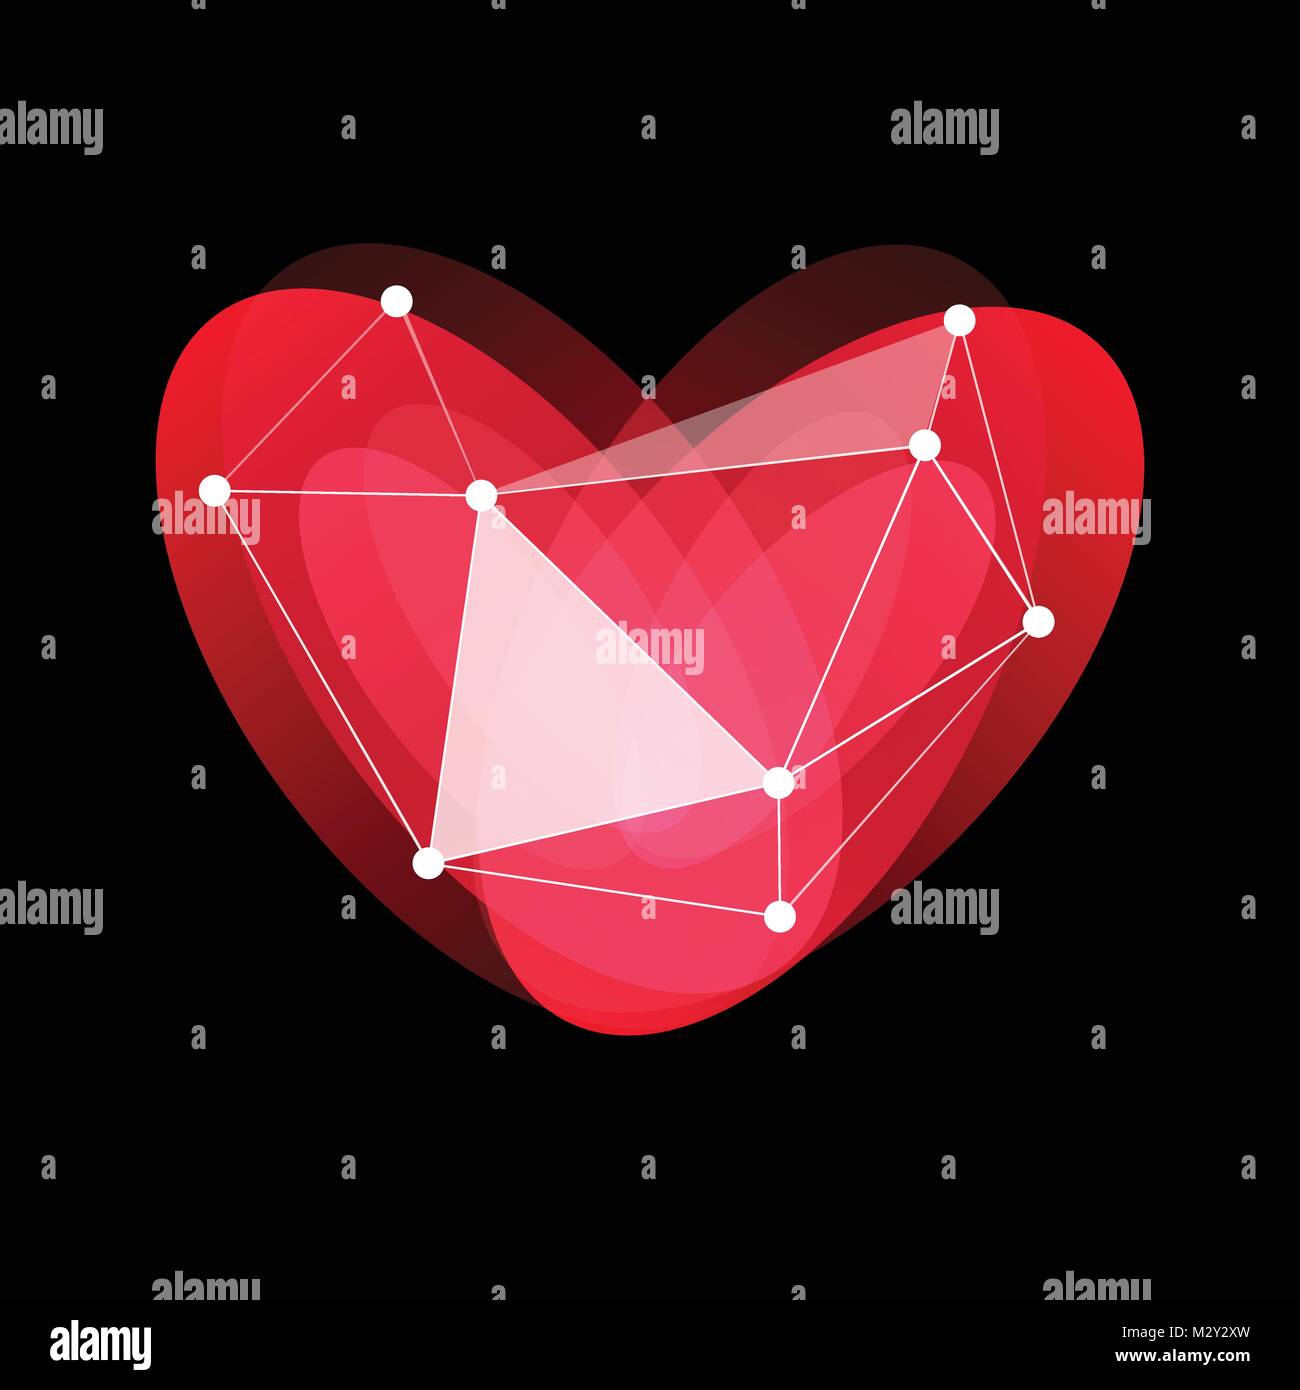 Happy Valentines Day logo, red, glass, porcelain heart, love holidays, greeting internet card, vector illustration on black background. Stock Vector